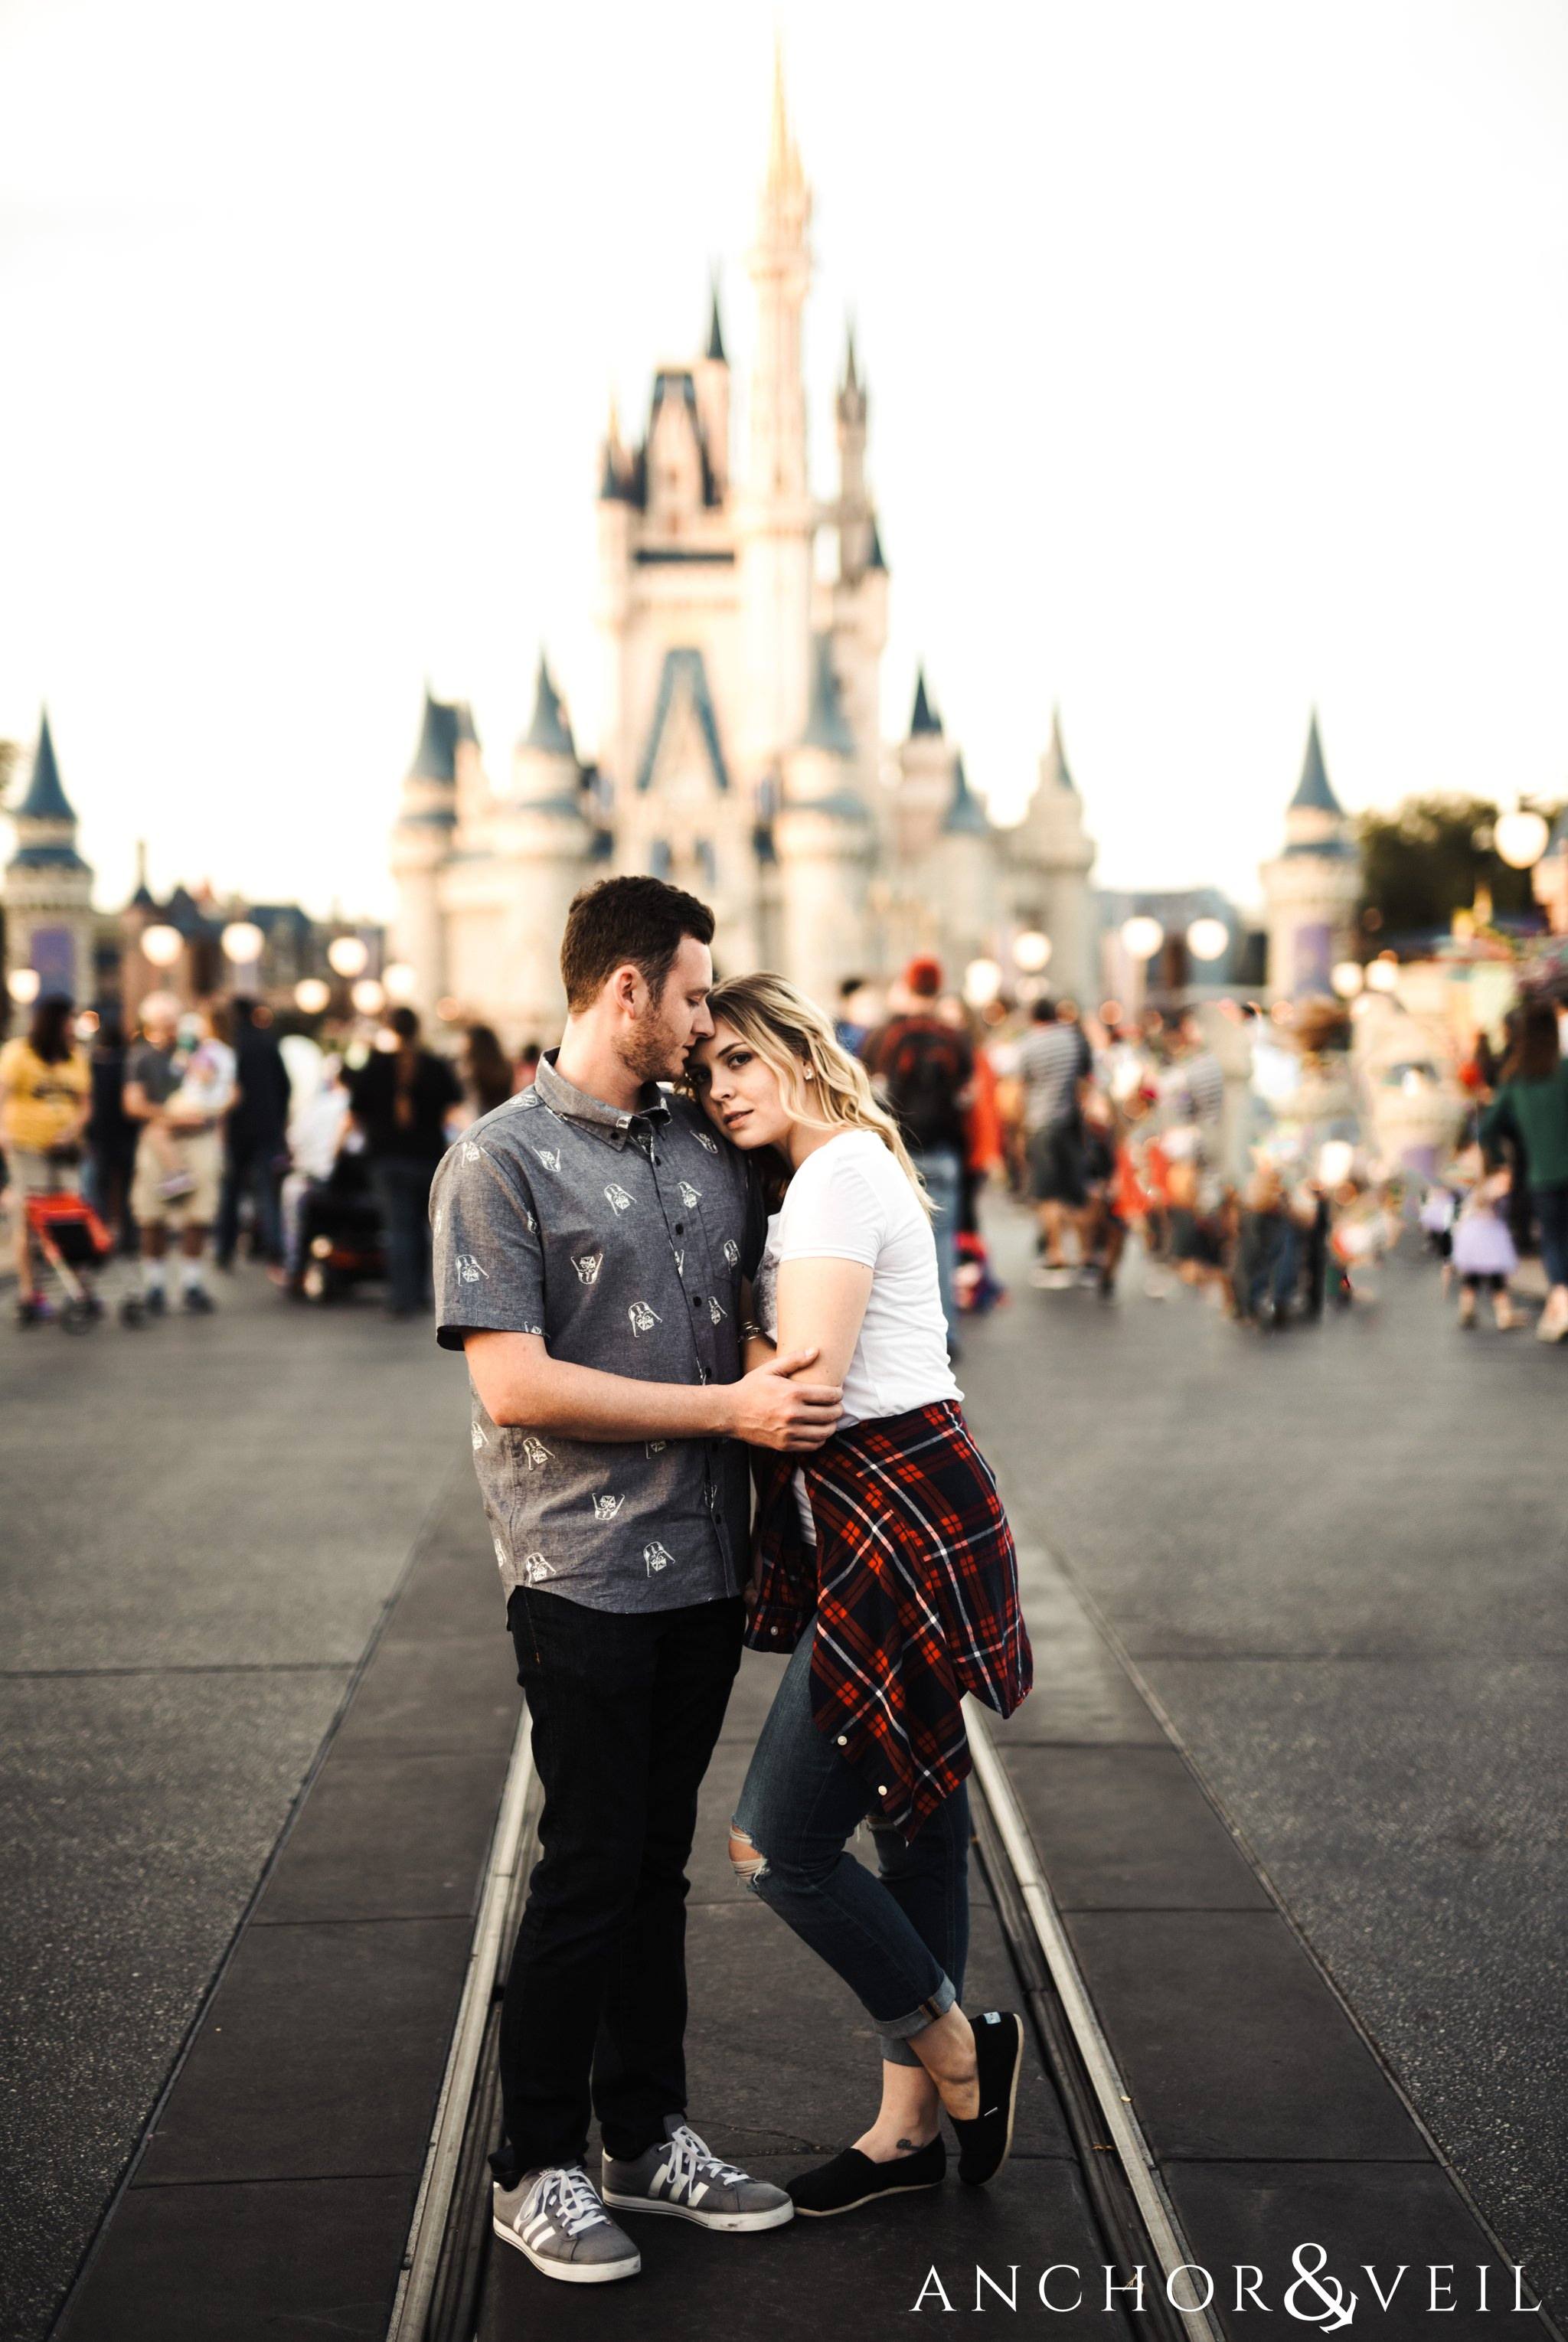 in front of Cinderella's castle during their Disney world engagement session at Disney's Magic Kingdom